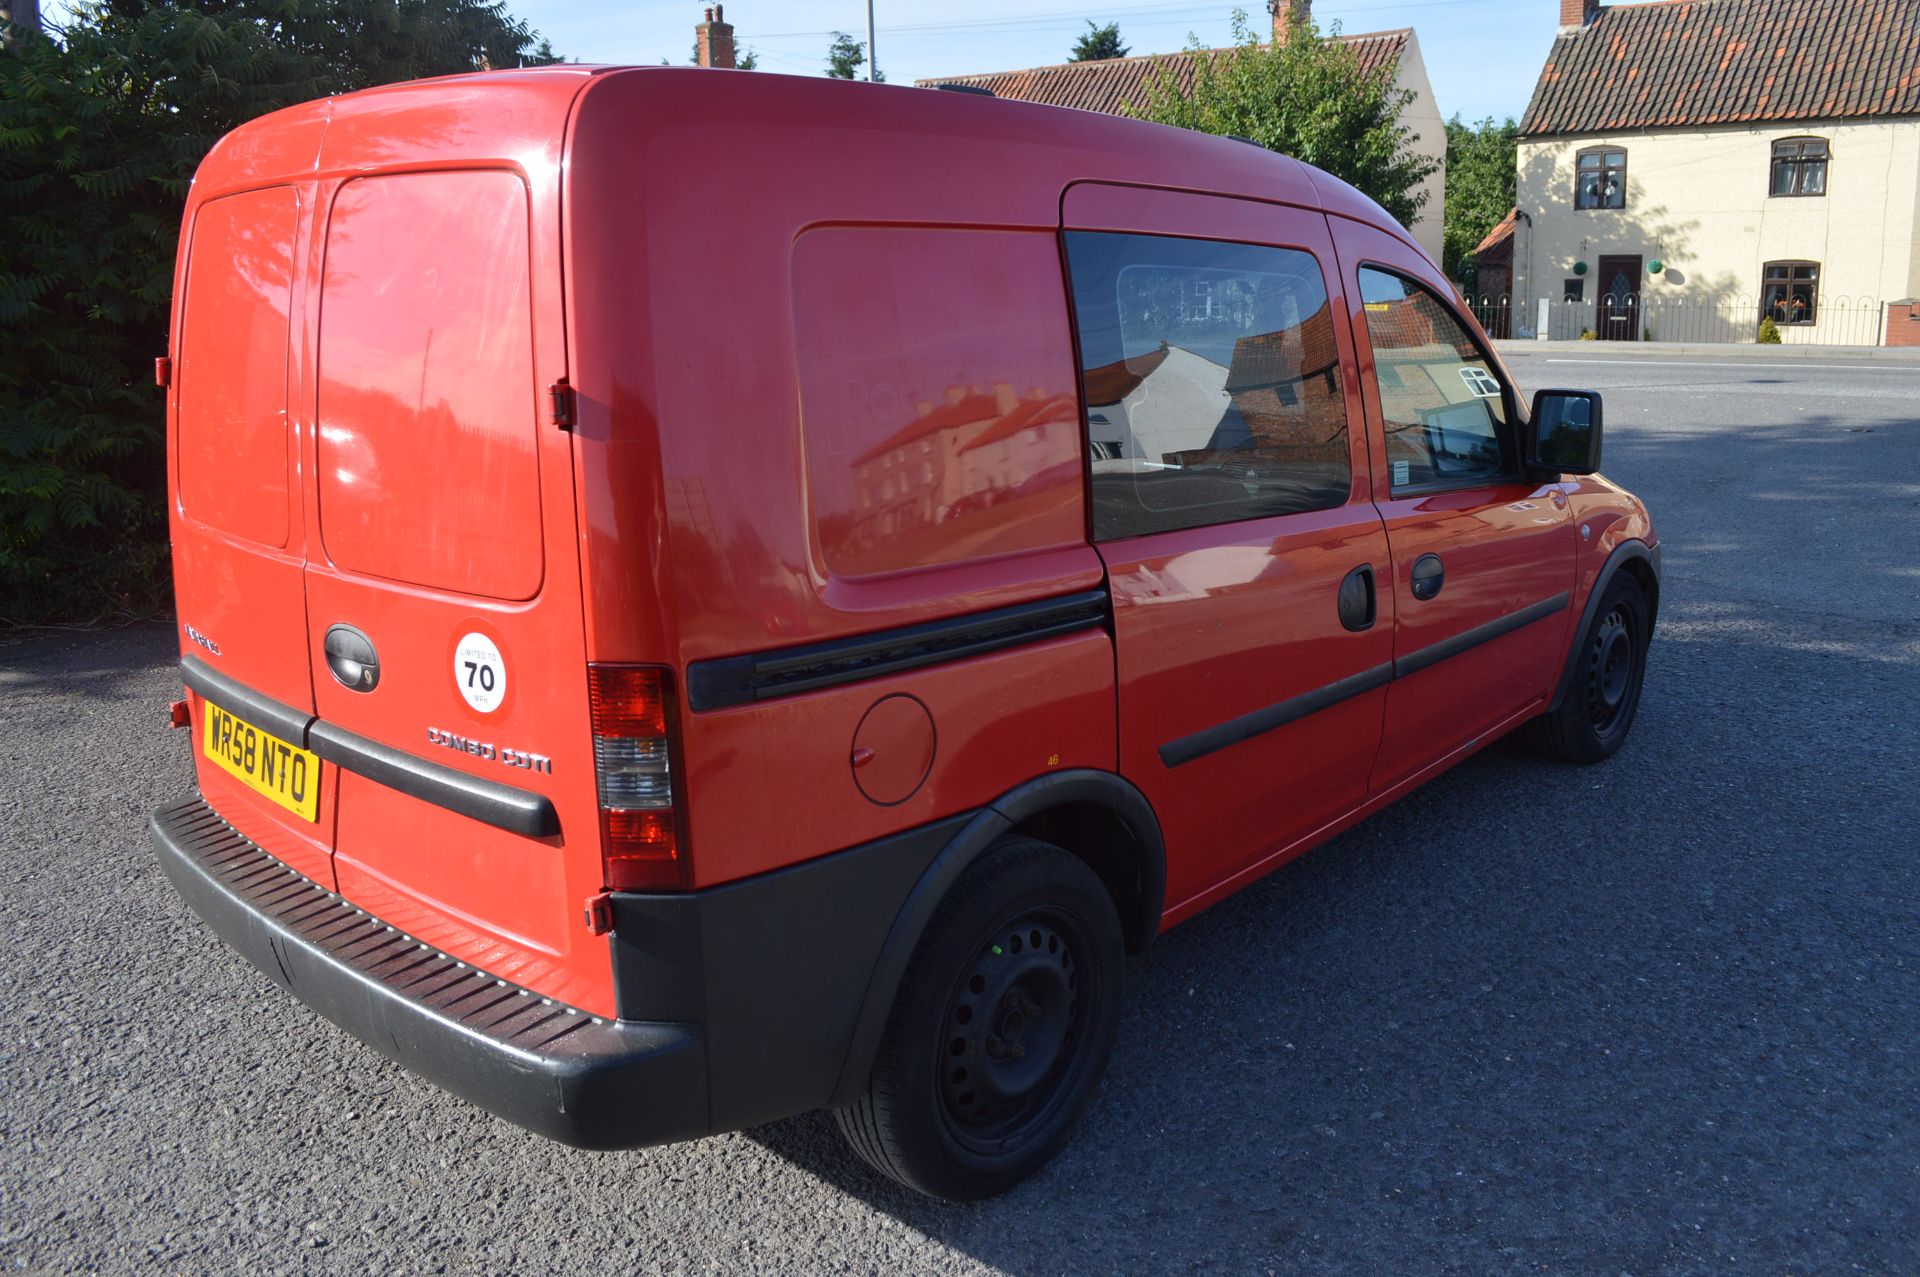 2008/58 REG VAUXHALL COMBO CDTI SWB CREW VAN - 1 OWNER FROM NEW, ROYAL MAIL *NO VAT* - Image 6 of 18